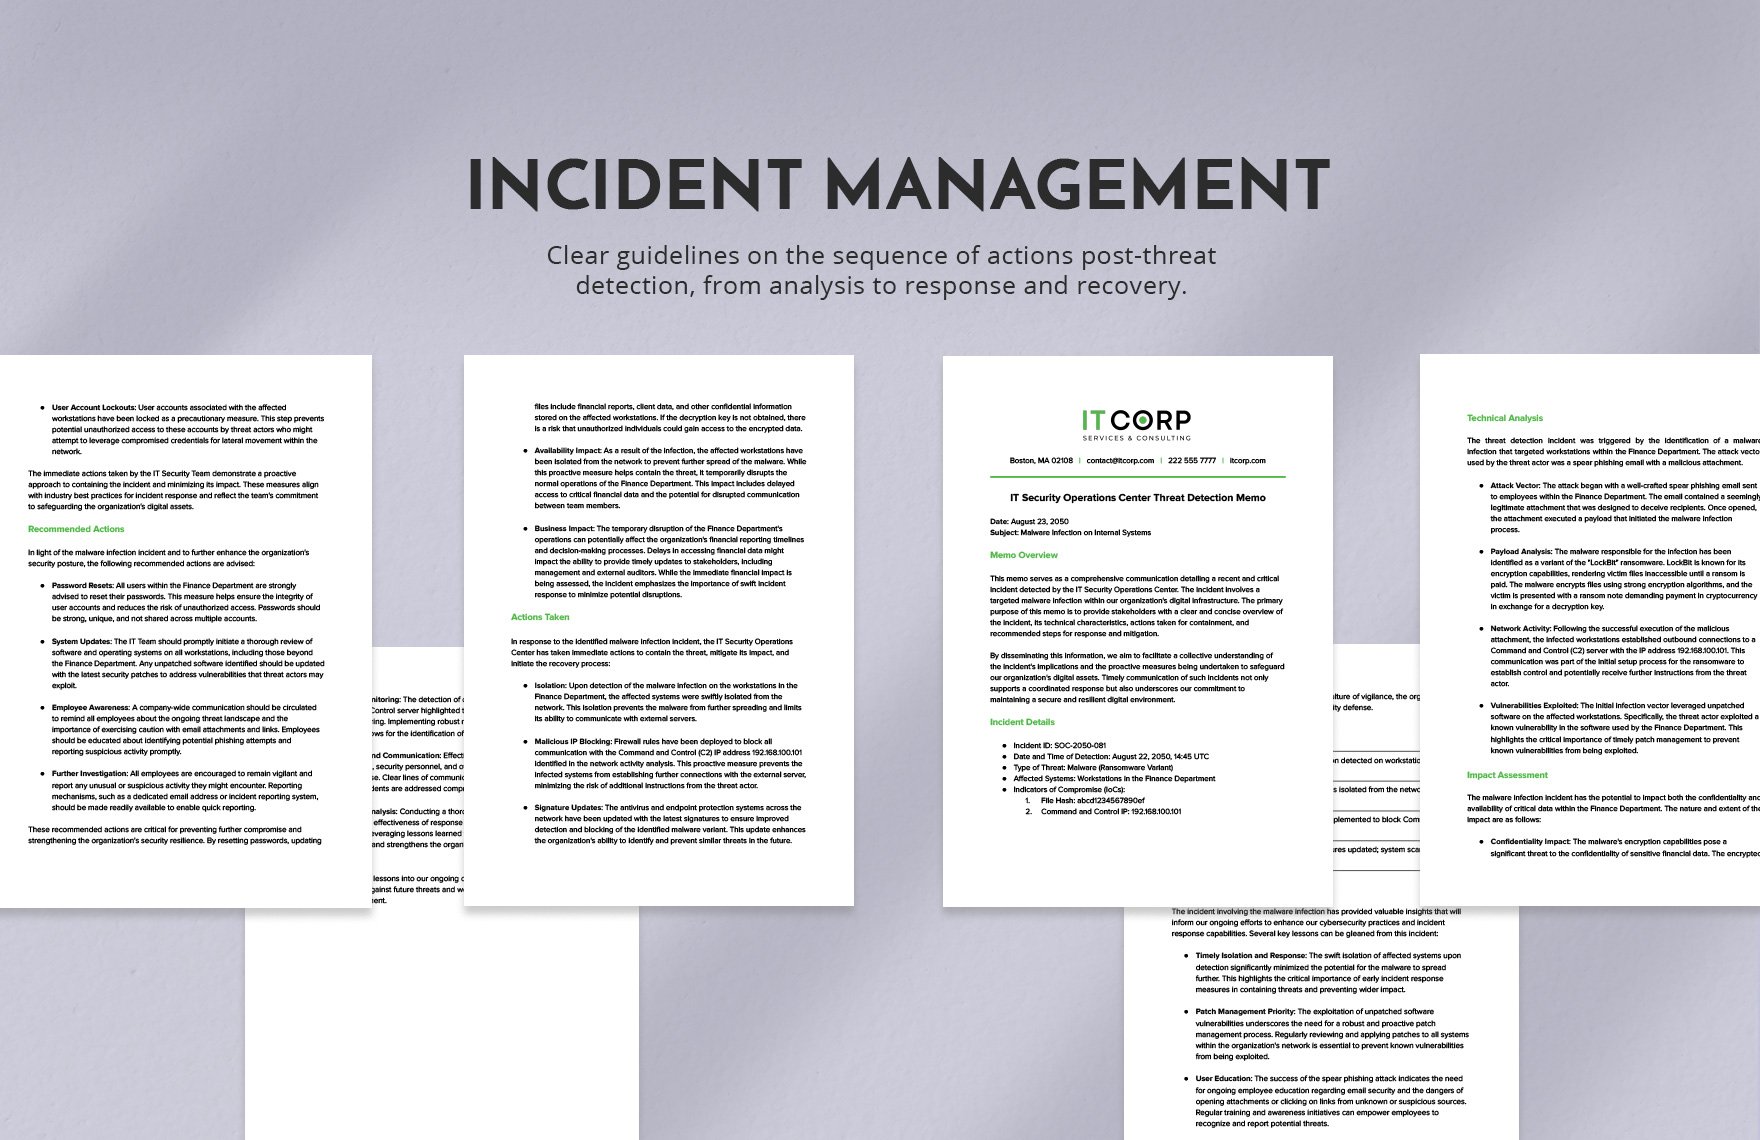 IT Security Operations Center Threat Detection Memo Template